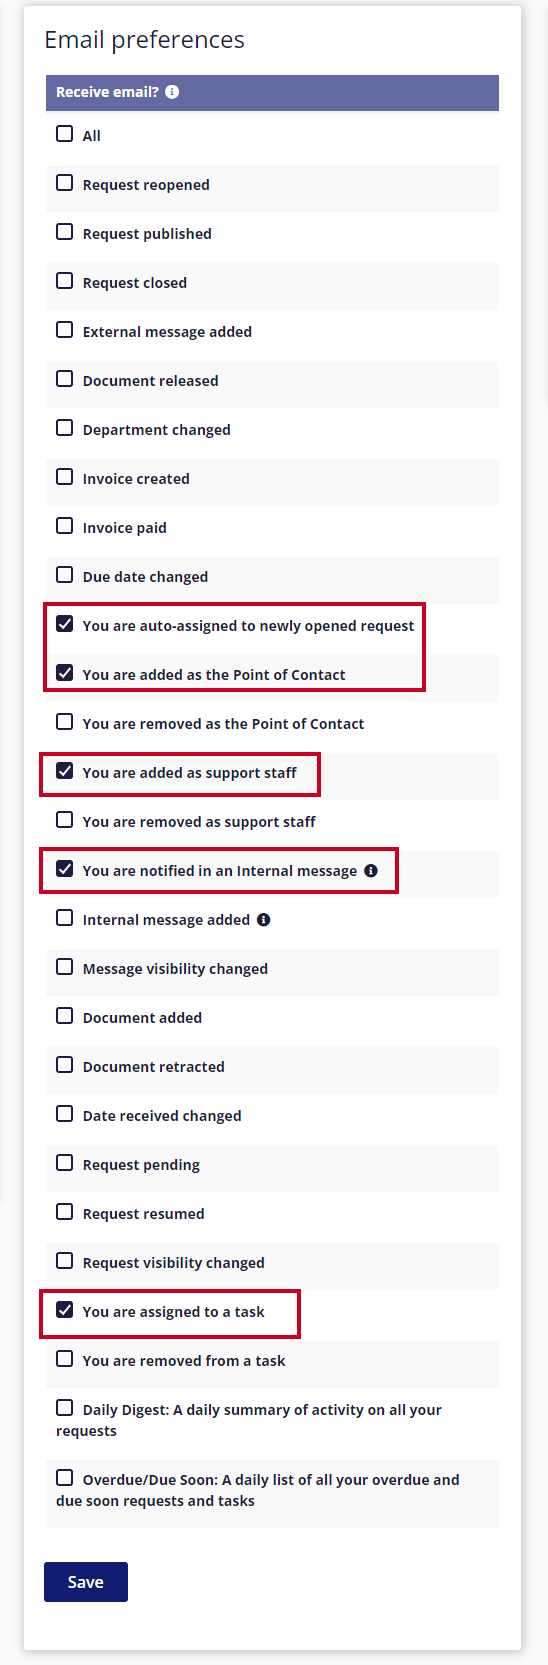 A list of email preferences to receive email notifications about. Five options have been selected: 'You are auto-assigned to newly opened request', 'You are added as the Point of Contact', 'You are added as support staff', 'You are notified in an internal message', and 'You are assigned to a task'.